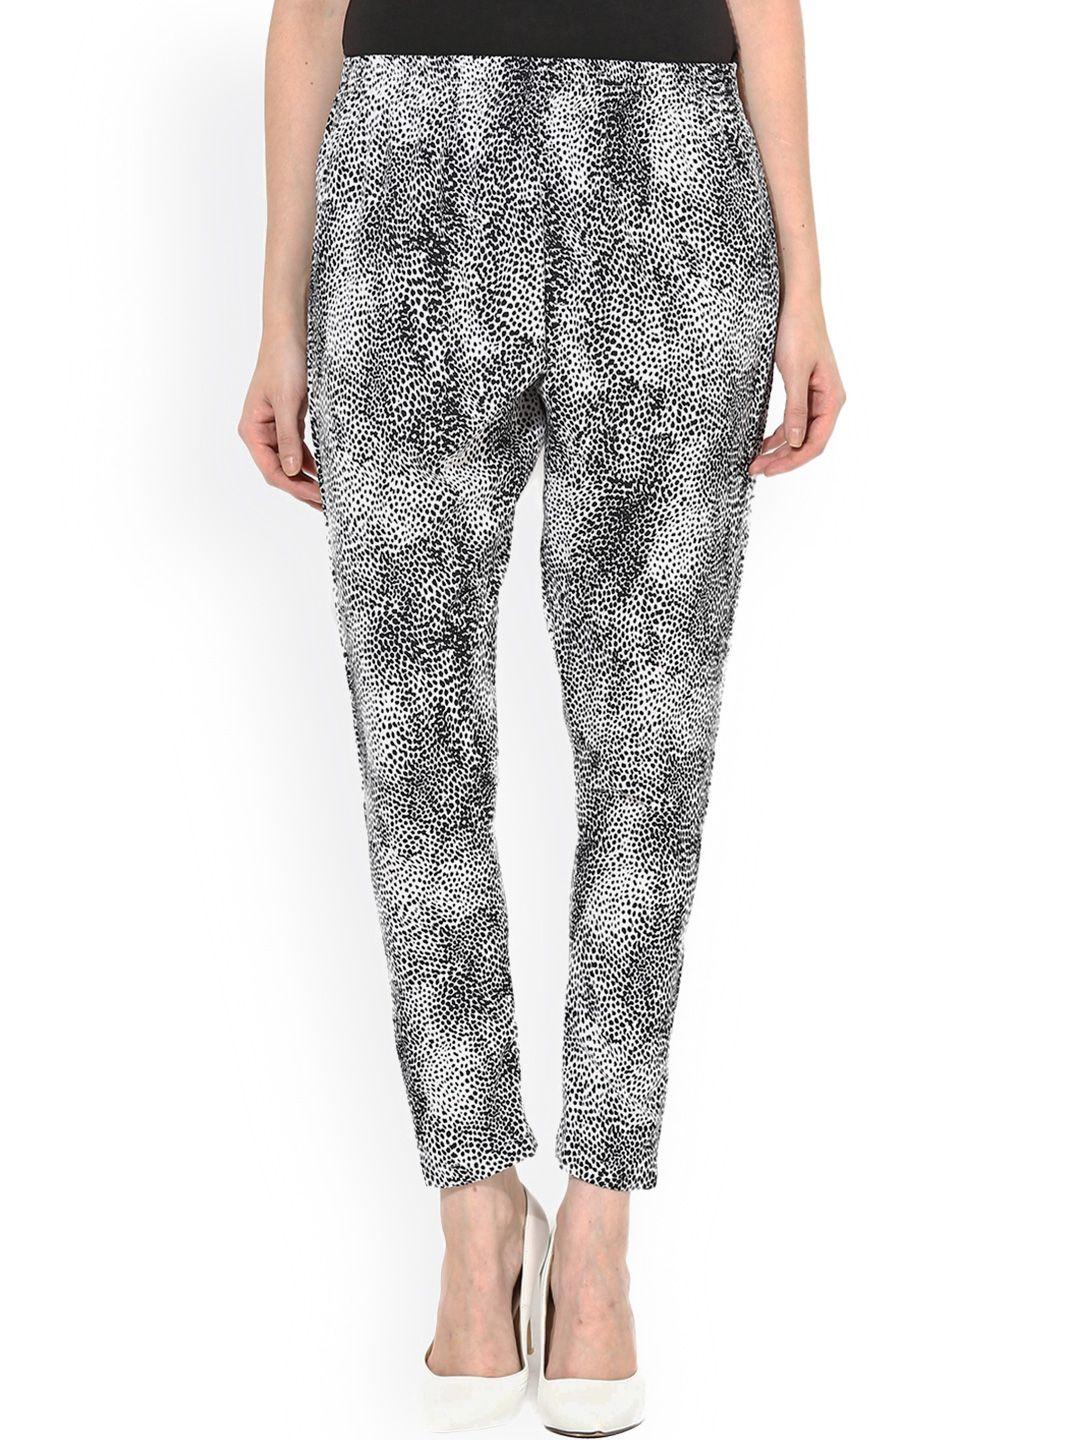 miss-chase-black-&-white-printed-ankle-length-casual-trousers